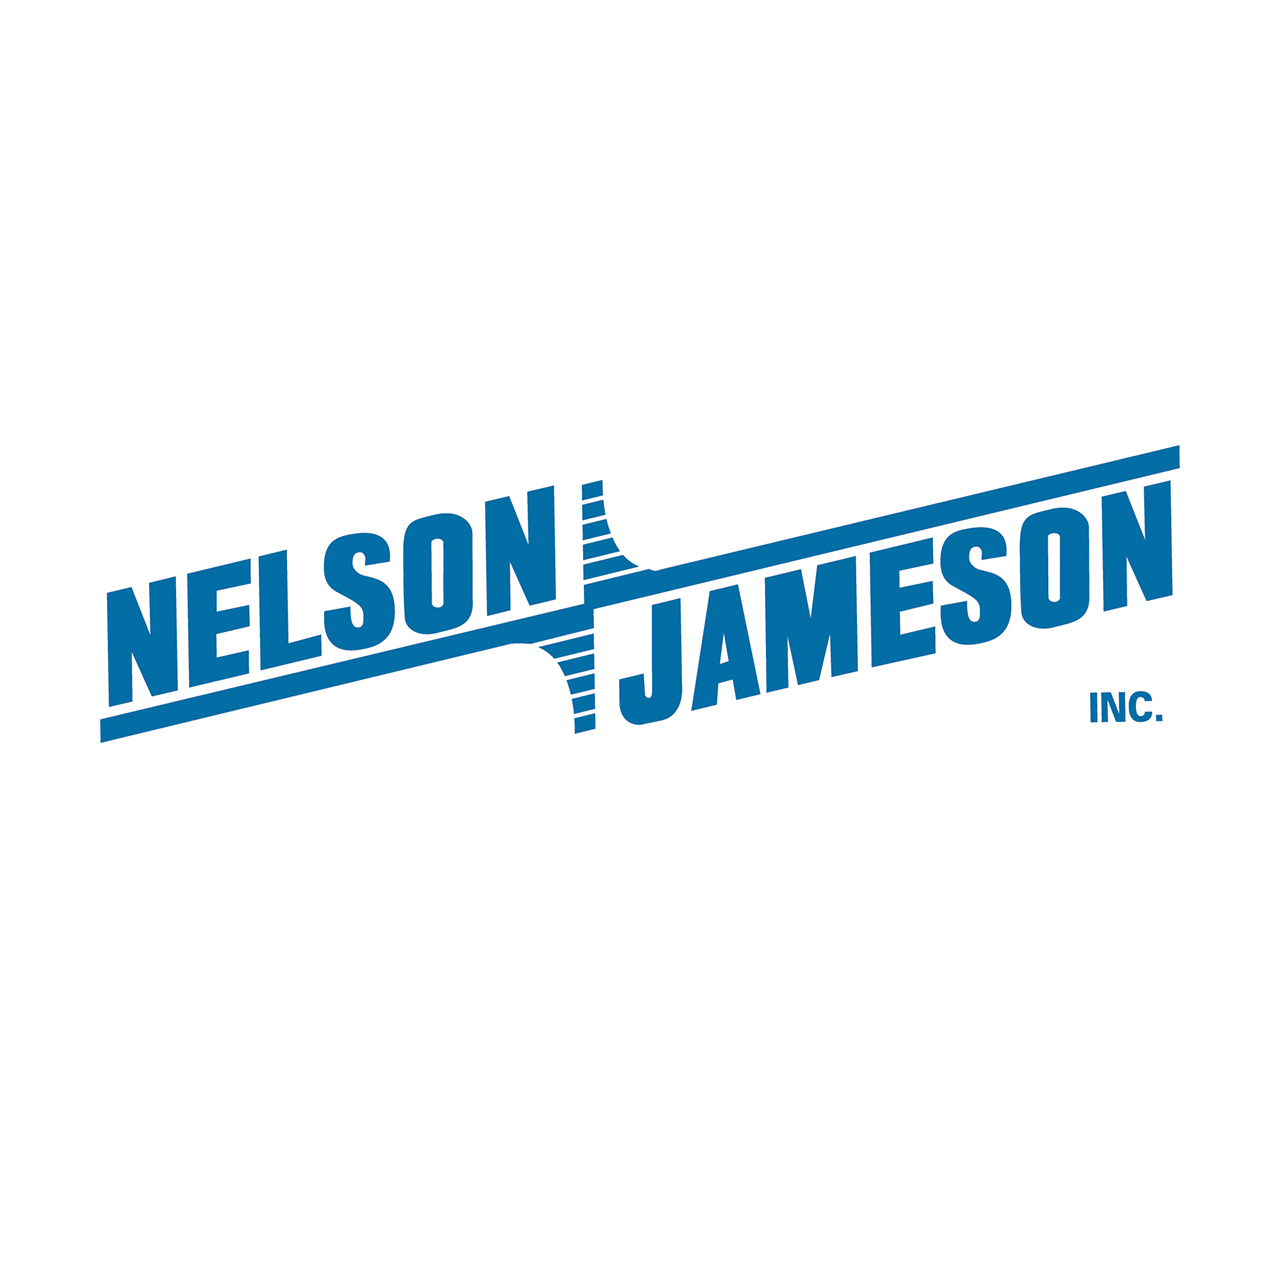 Nelson-Jameson Spirit-Filled Certified Dairy Thermometers